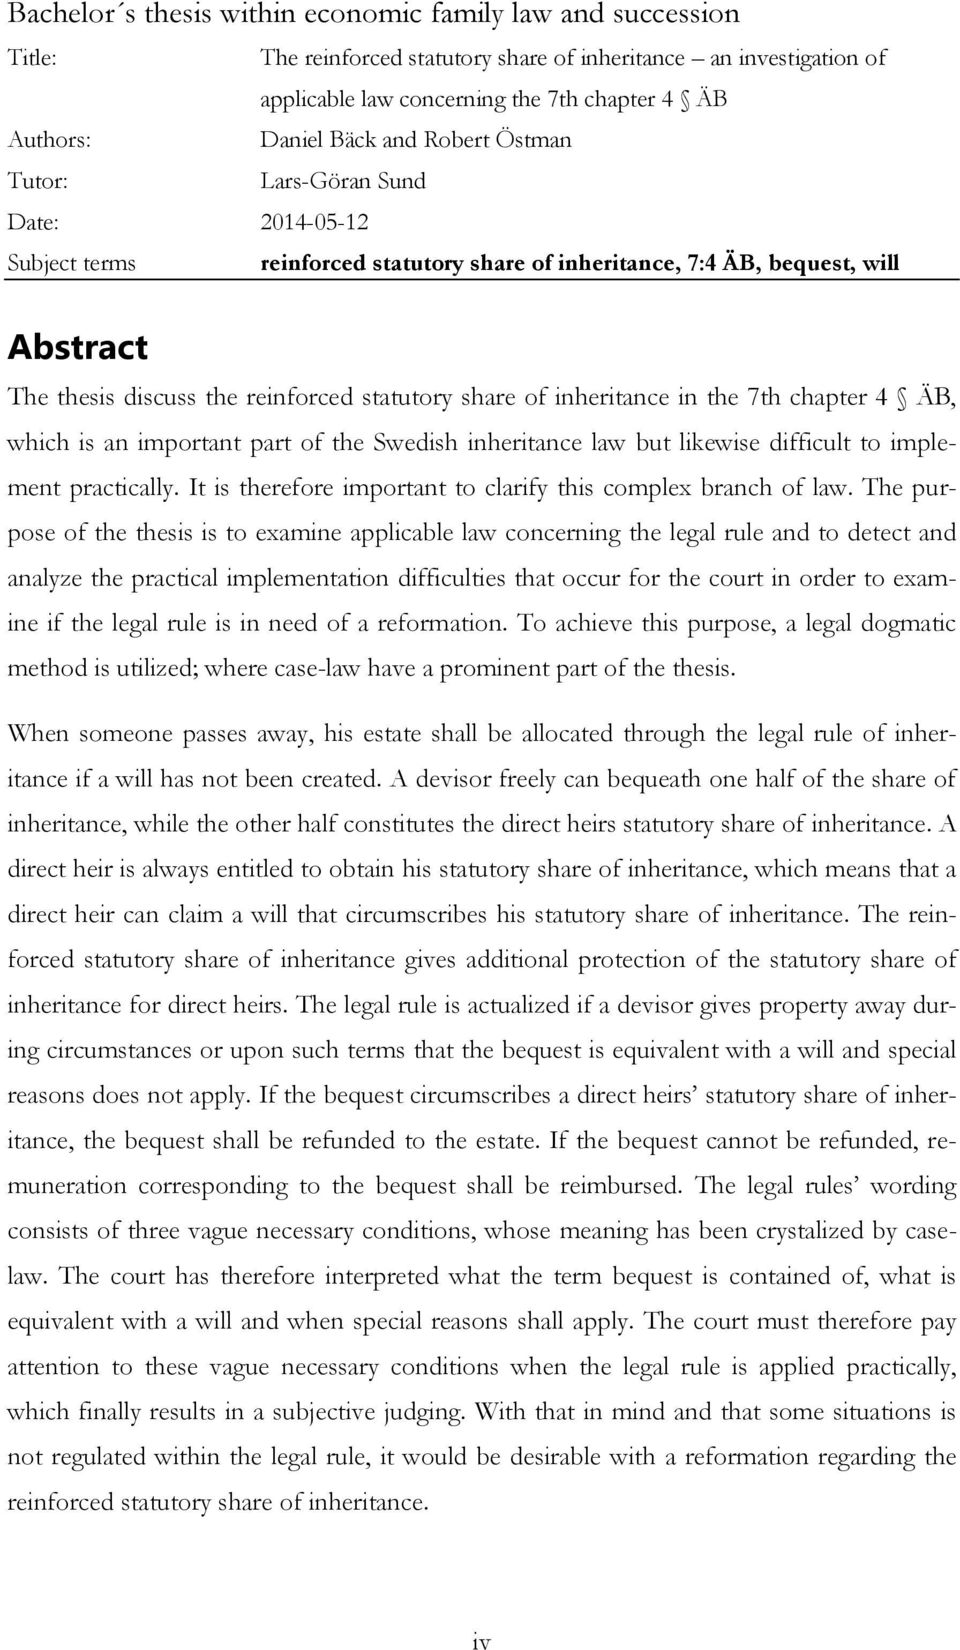 share of inheritance in the 7th chapter 4 ÄB, which is an important part of the Swedish inheritance law but likewise difficult to implement practically.